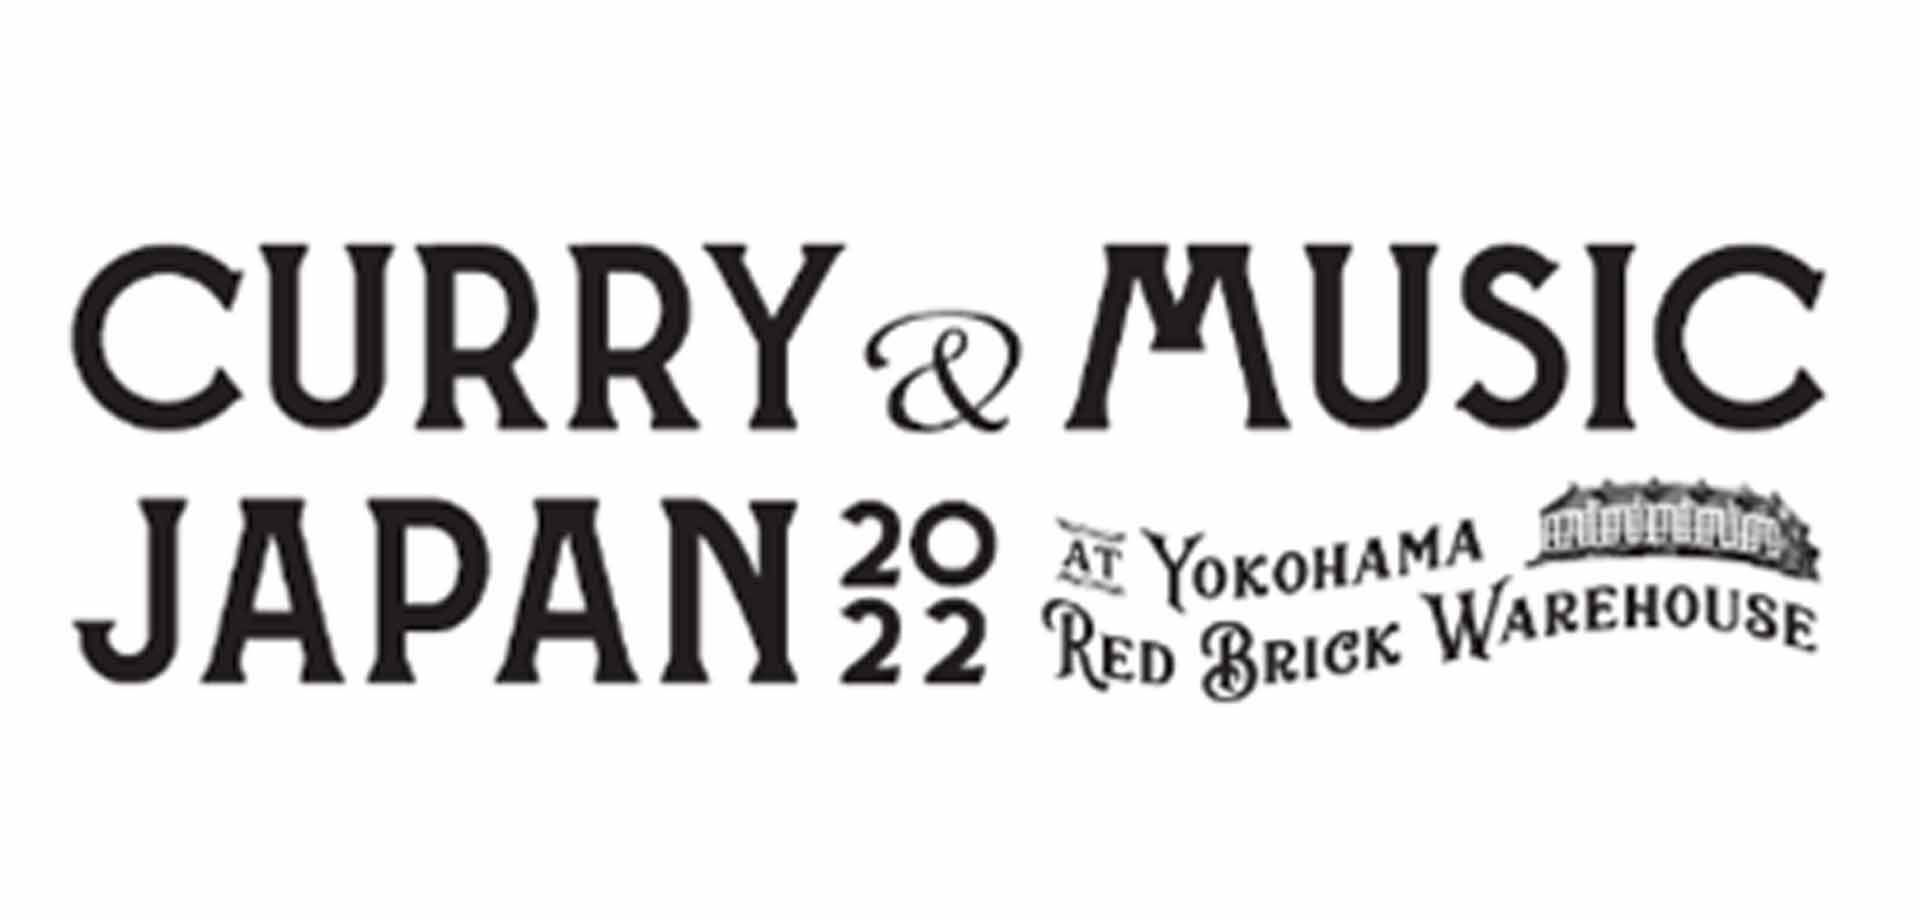 CURRY&MUSIC JAPAN 2022　横浜赤レンガ倉庫